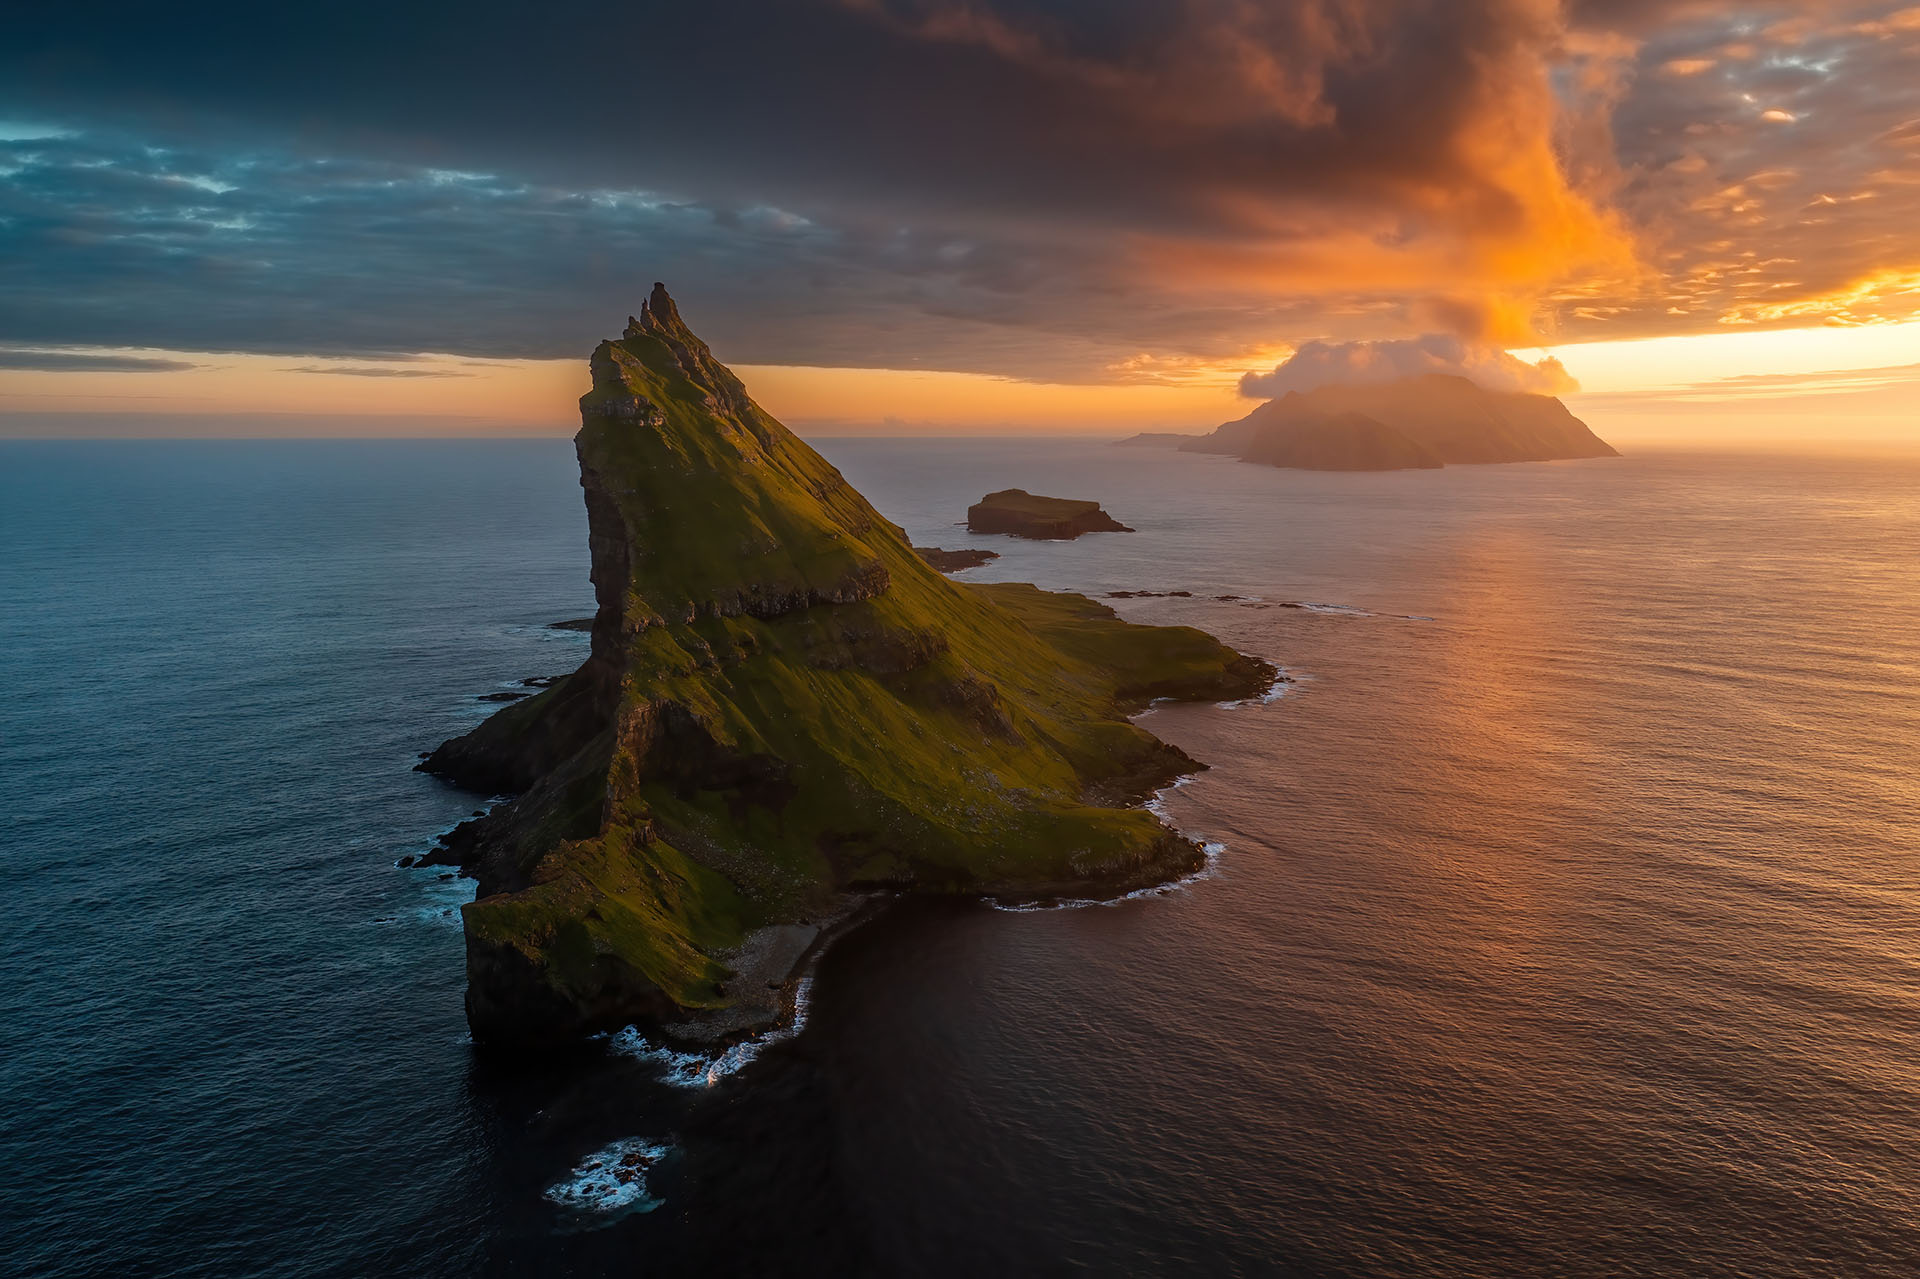 Midsummer at the Faroe Islands by Christian Rudolph